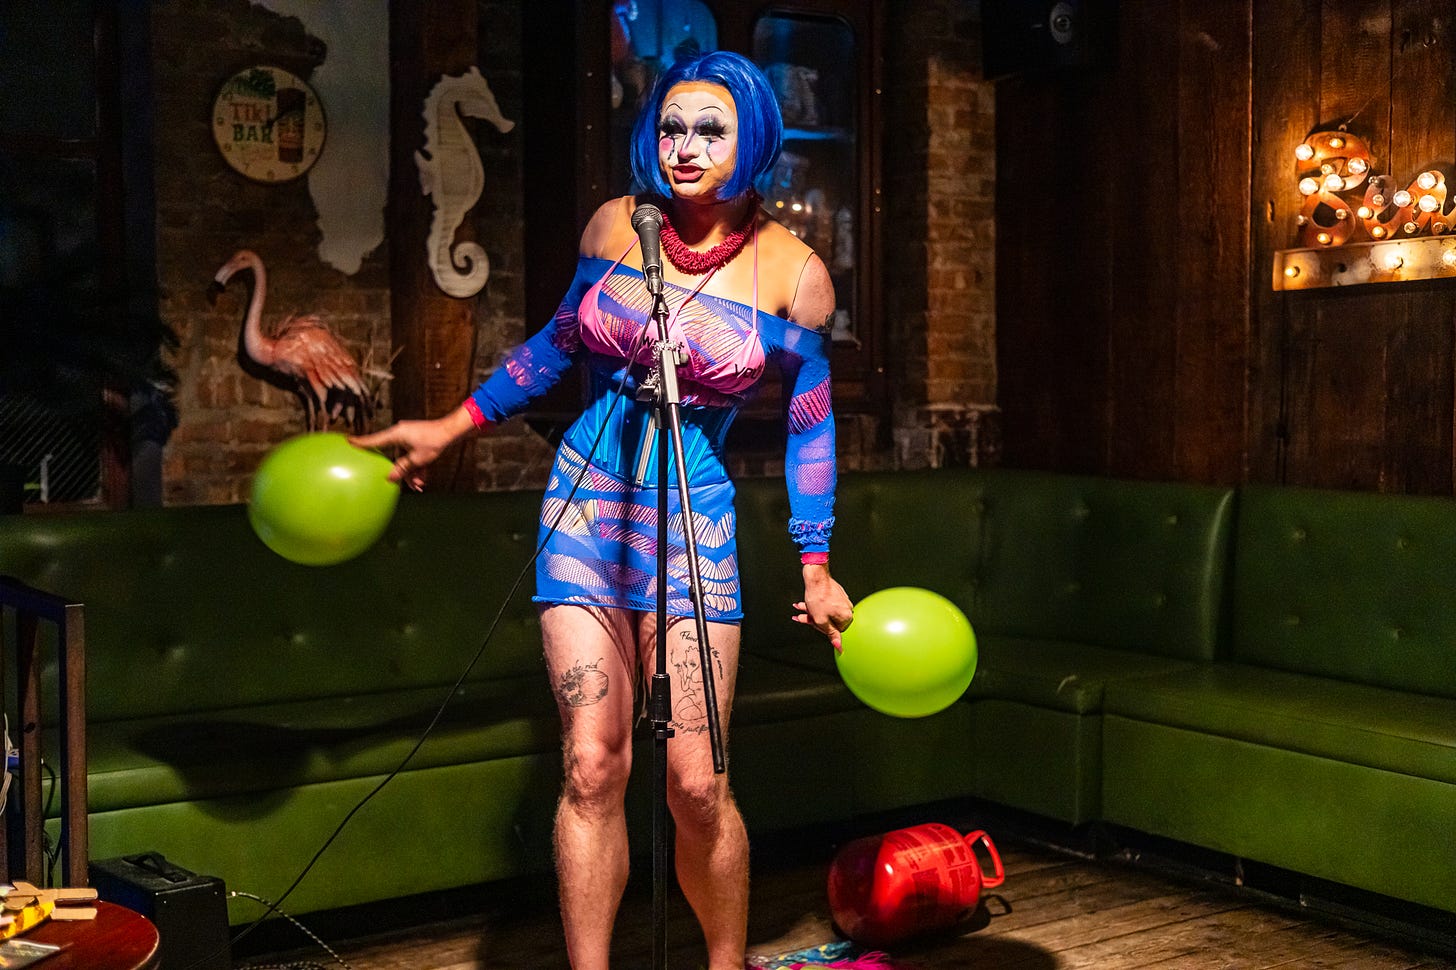 tank, a drag queen with three breasts in blue wig, pink bikini, blue mesh, corset, and clown makeup holds balloons and sings into mic at queers n peers variety show